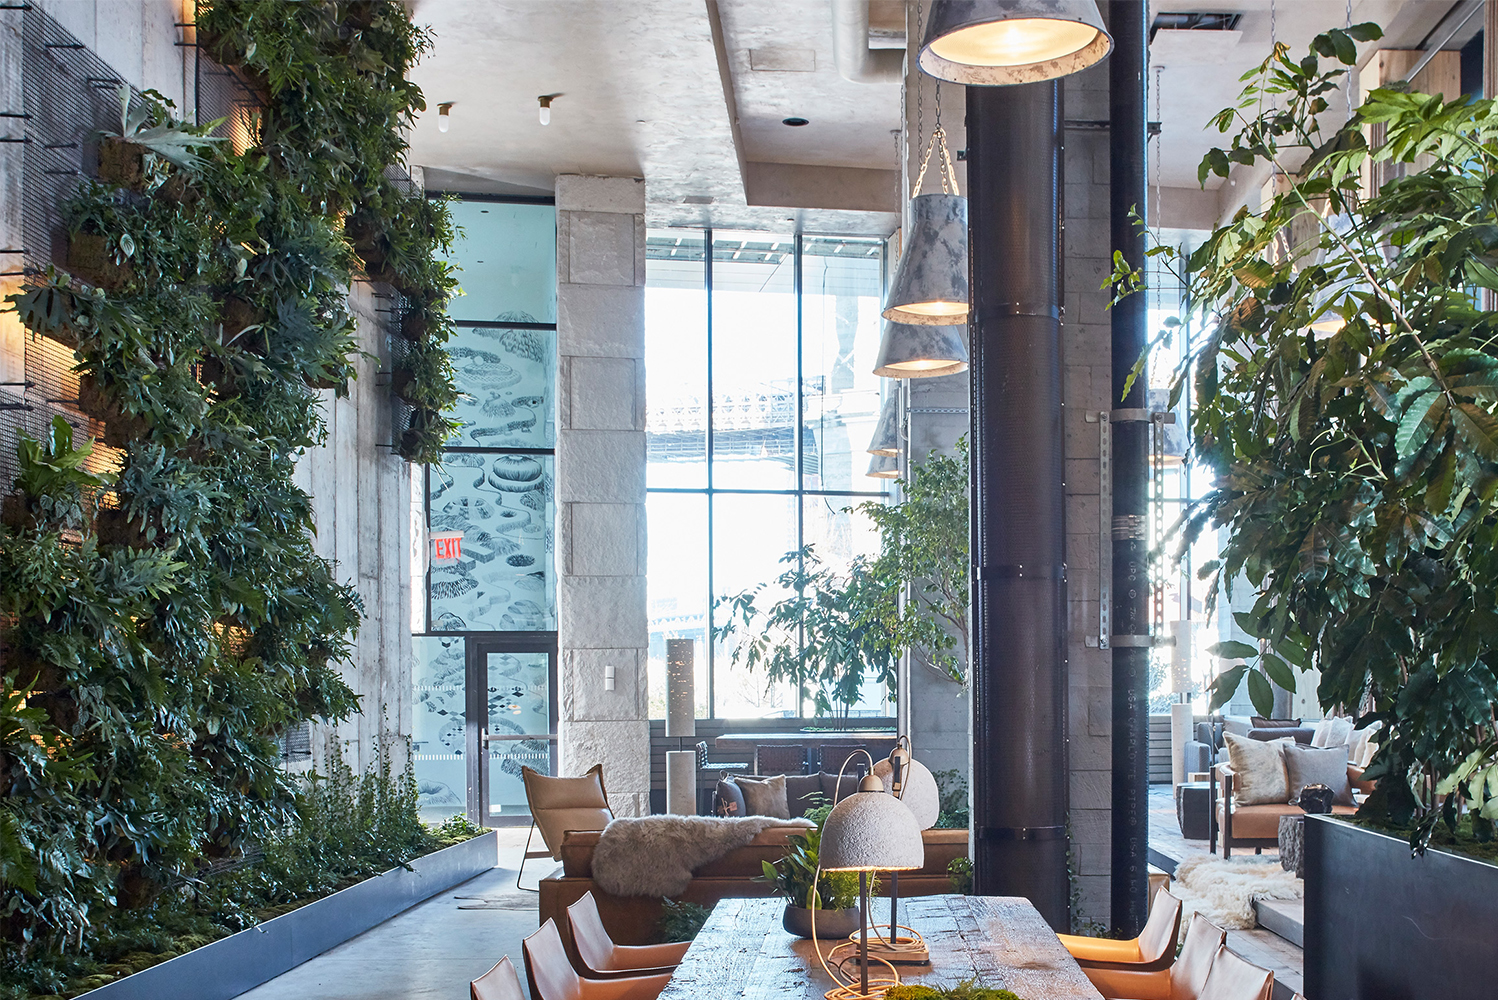 New York City-based landscape design firm Harrison Green brought the outdoors inside in the newly opened 1 Hotel Brooklyn Bri